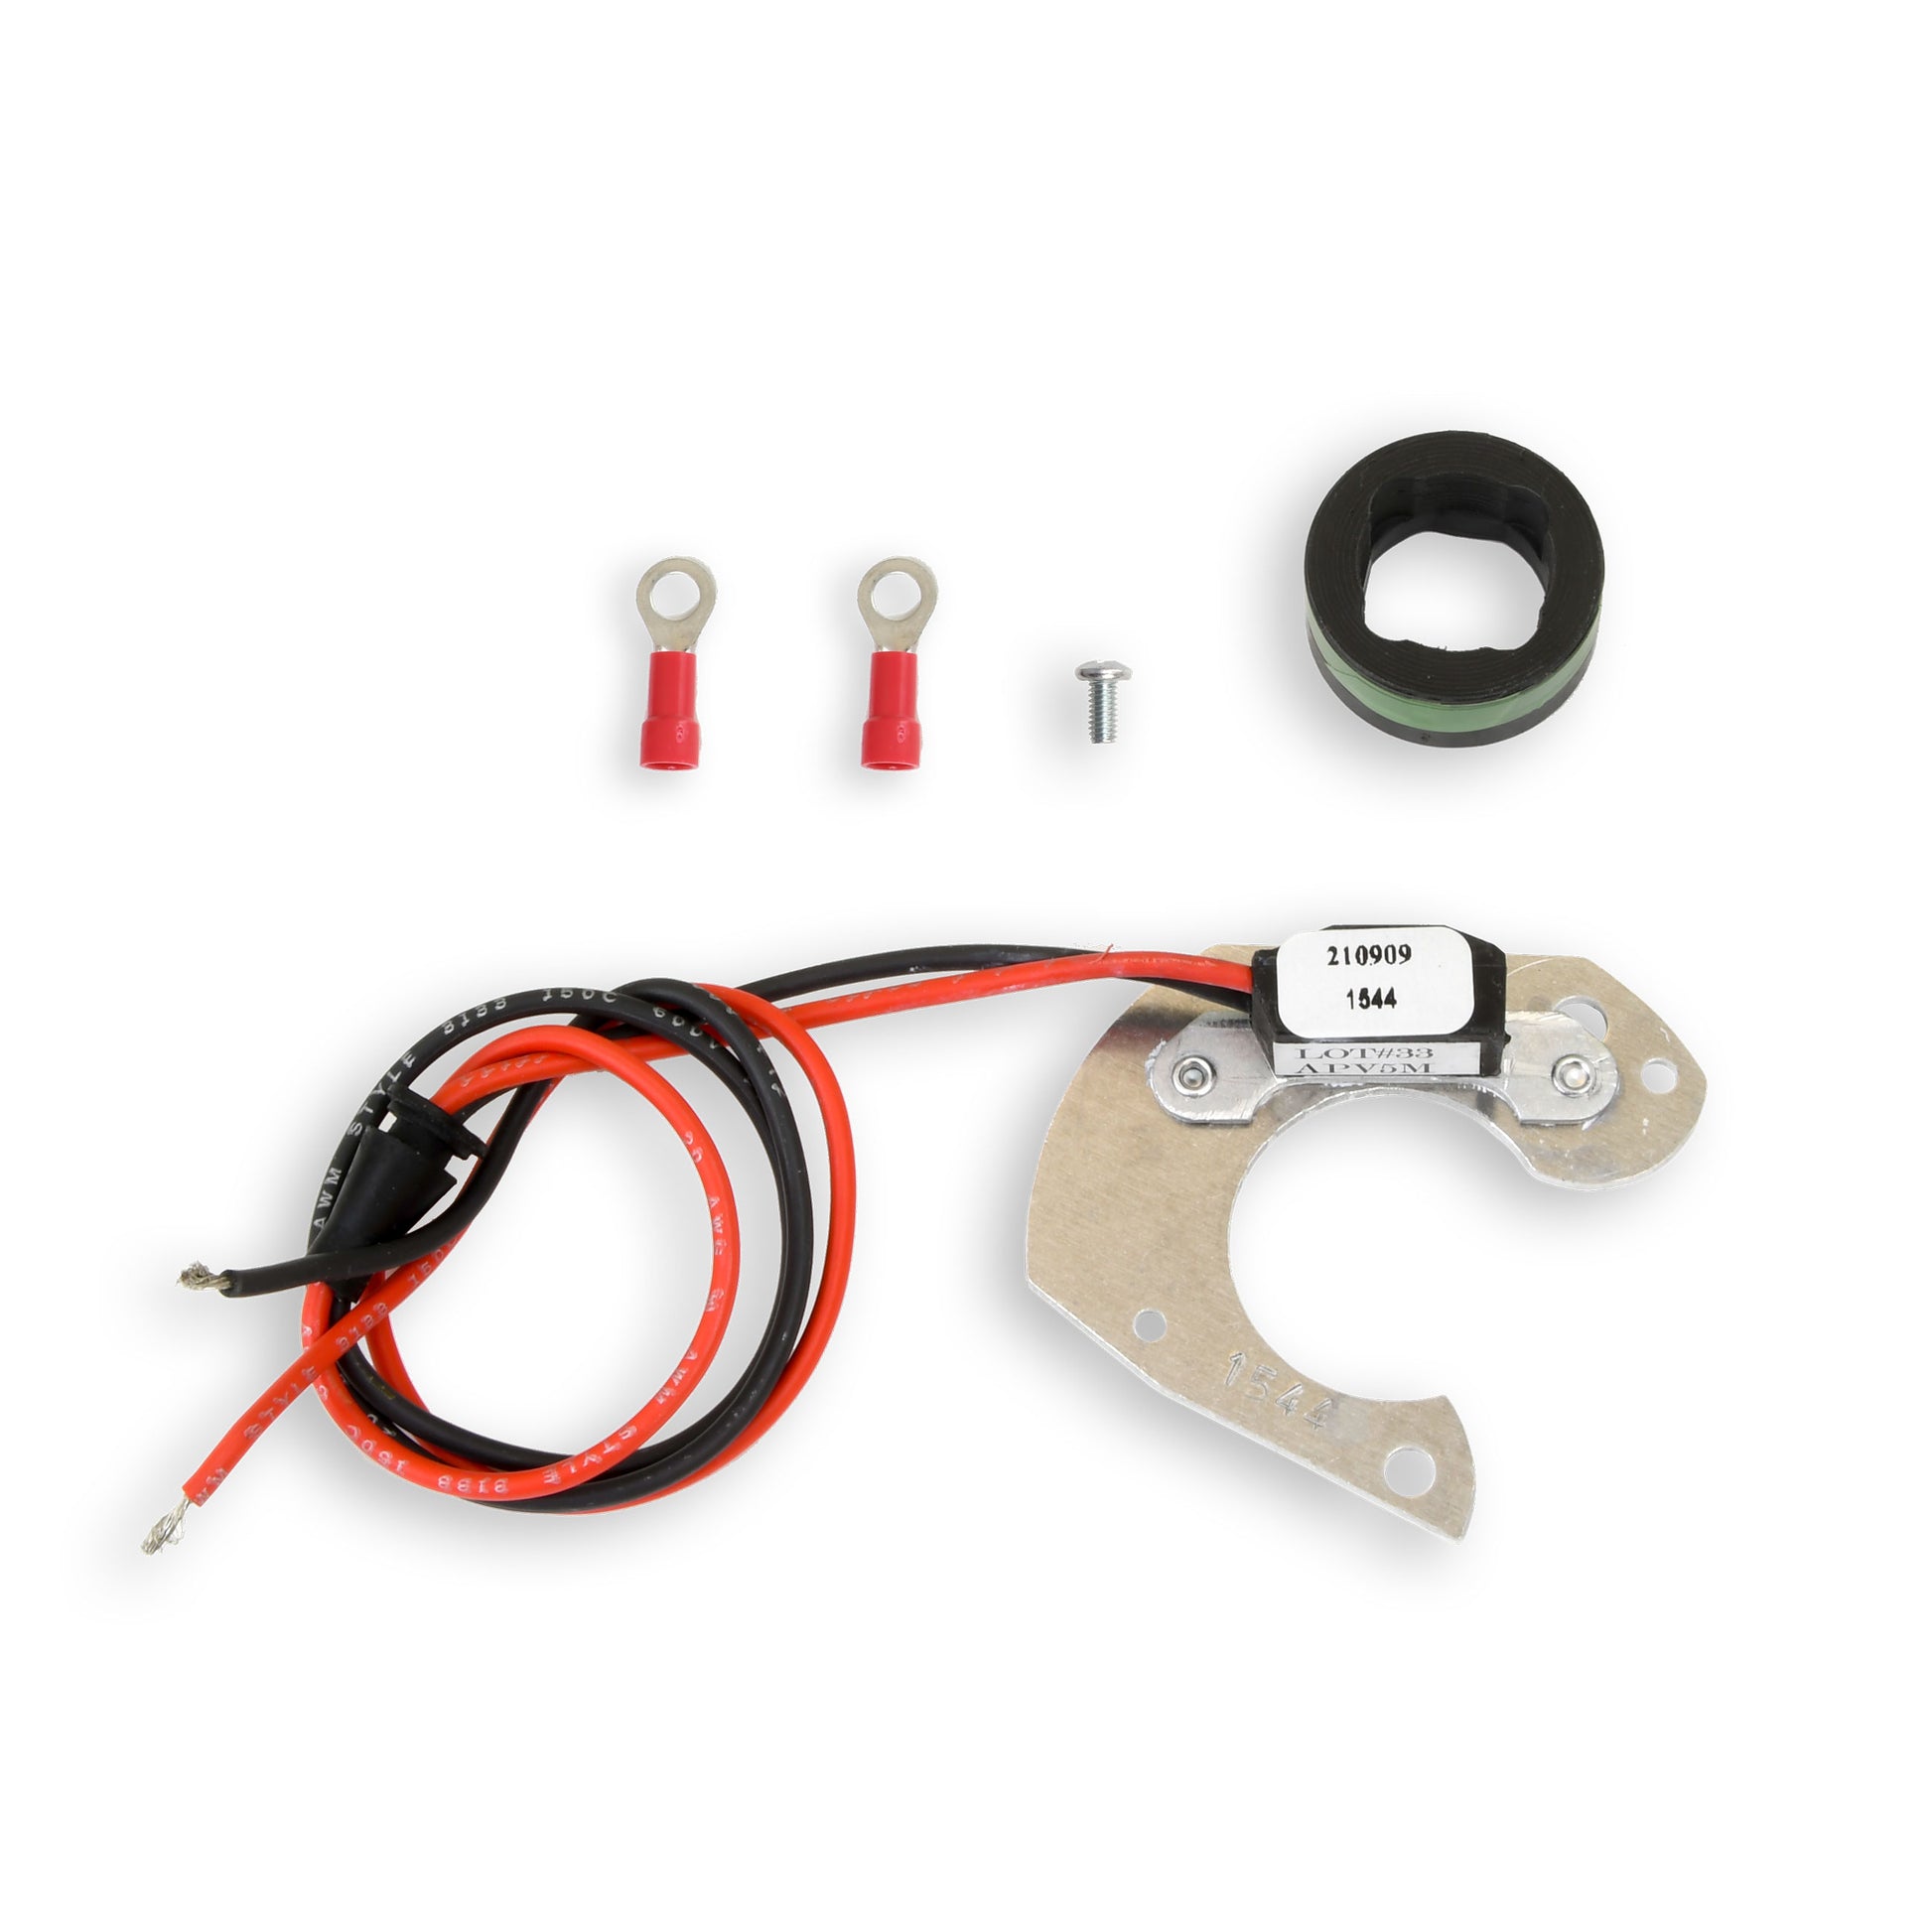 PerTronix Ignitor Electronic Ignition Conversion Kit-1544